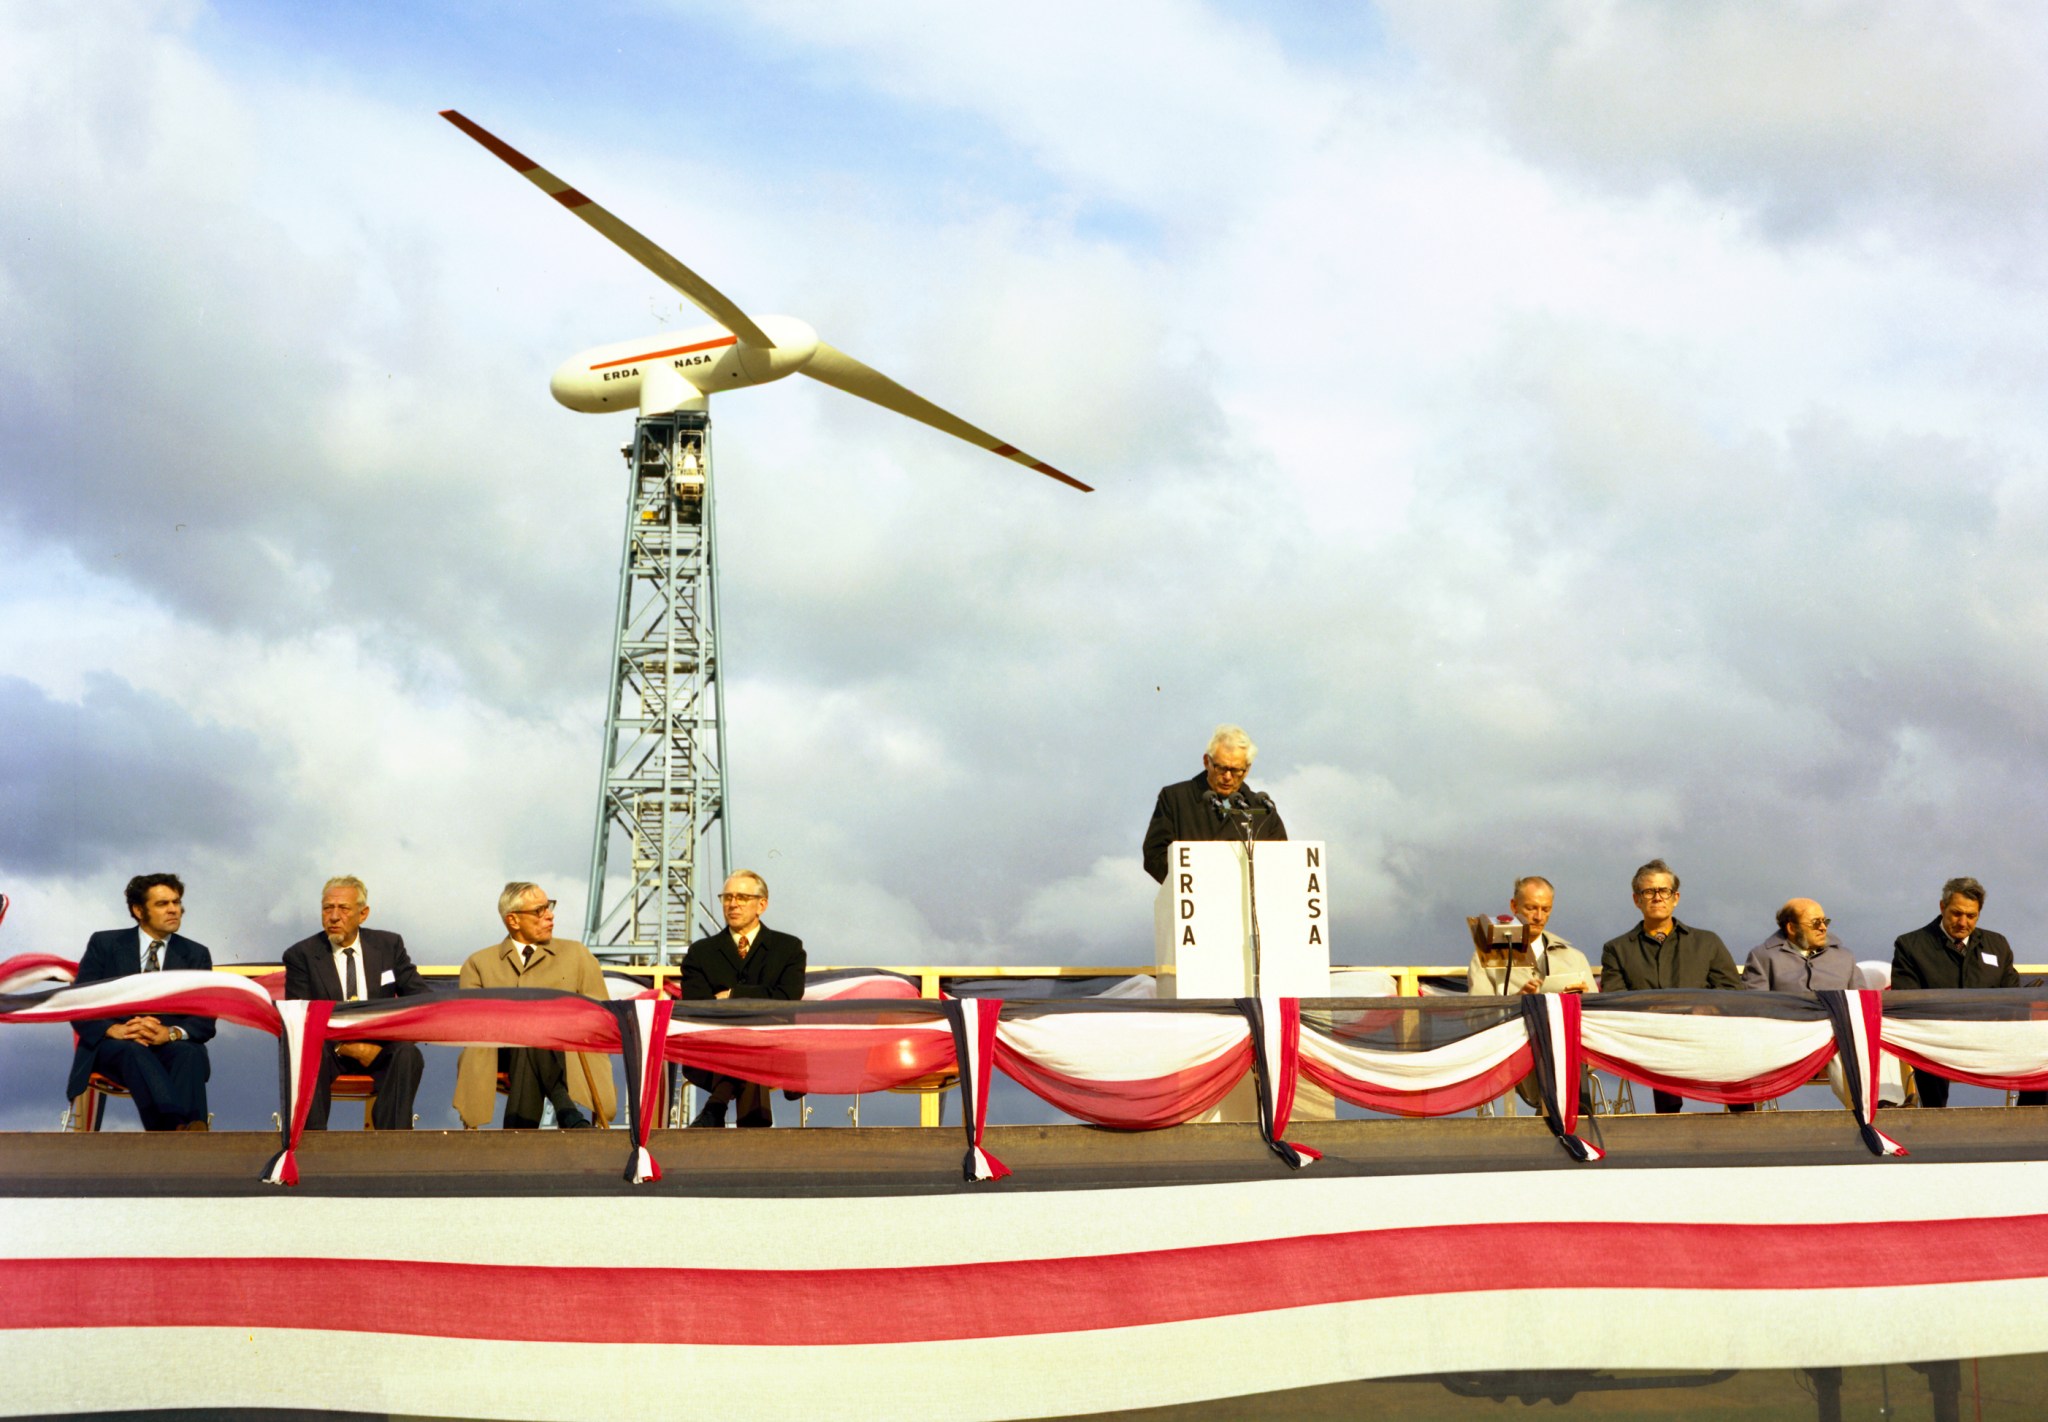 Group of men on podium in front of wind turbine.